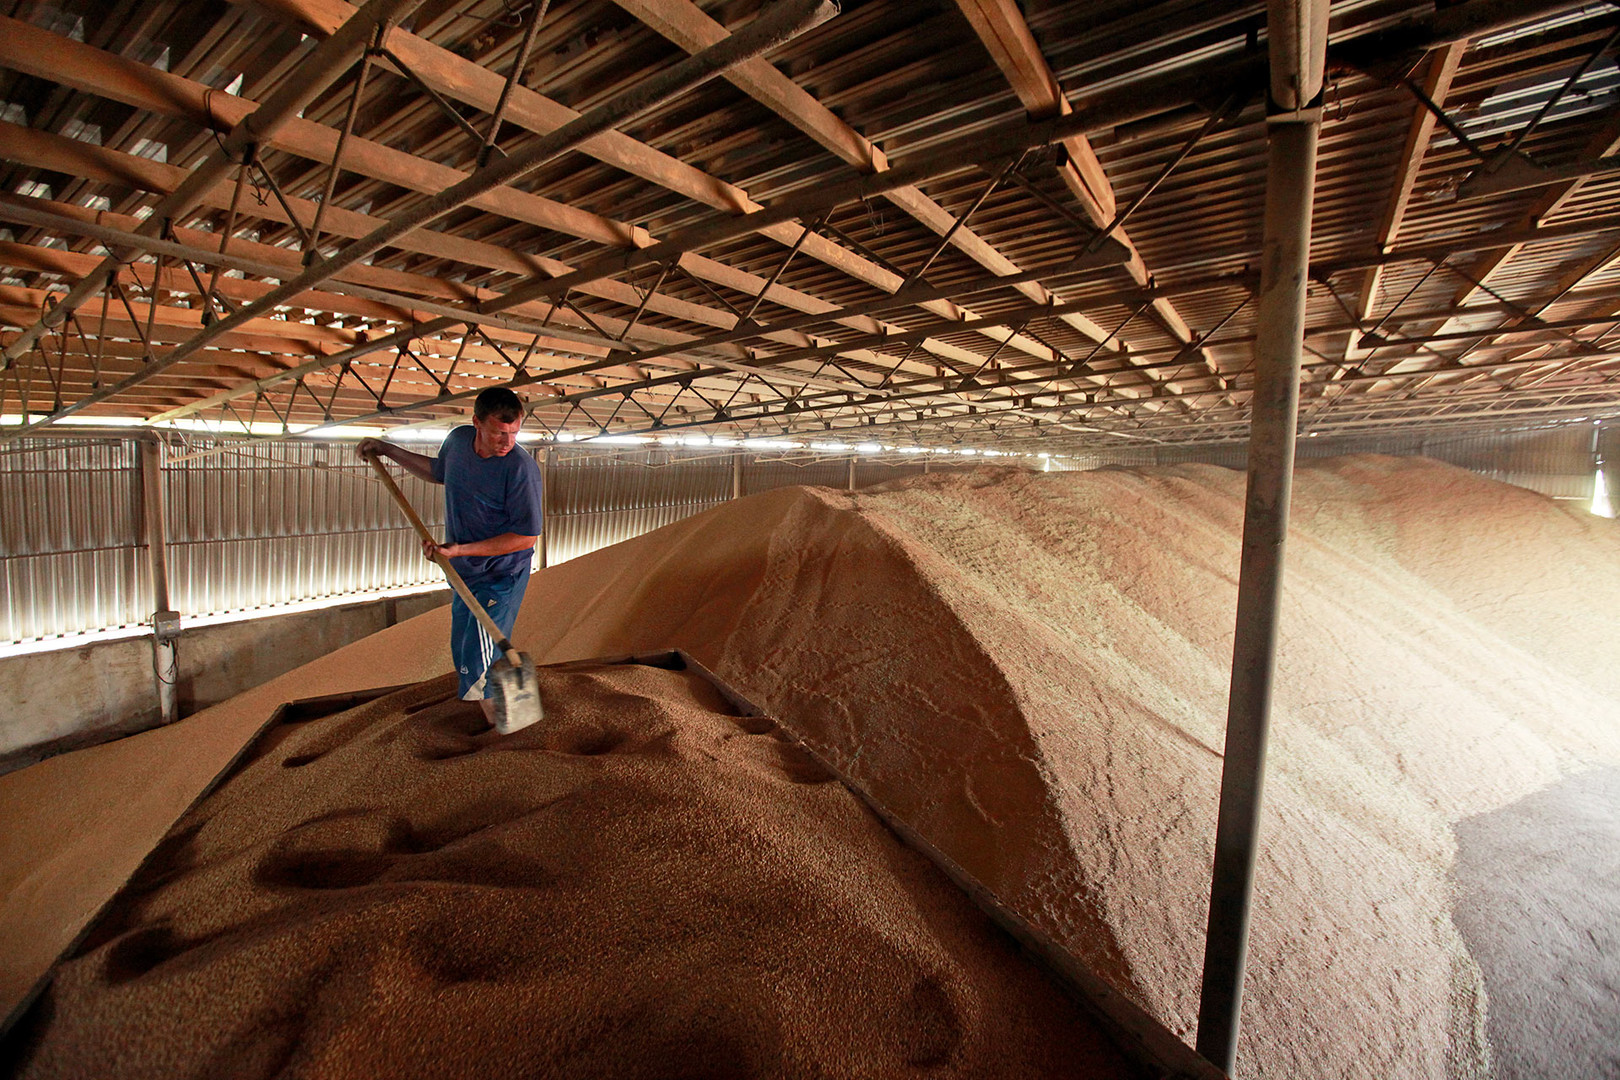 A worker shovels grain in a warehouse in the the village of Konstantinovo, some 60 km (37 miles) from the Southern Russian city of Stavropol.